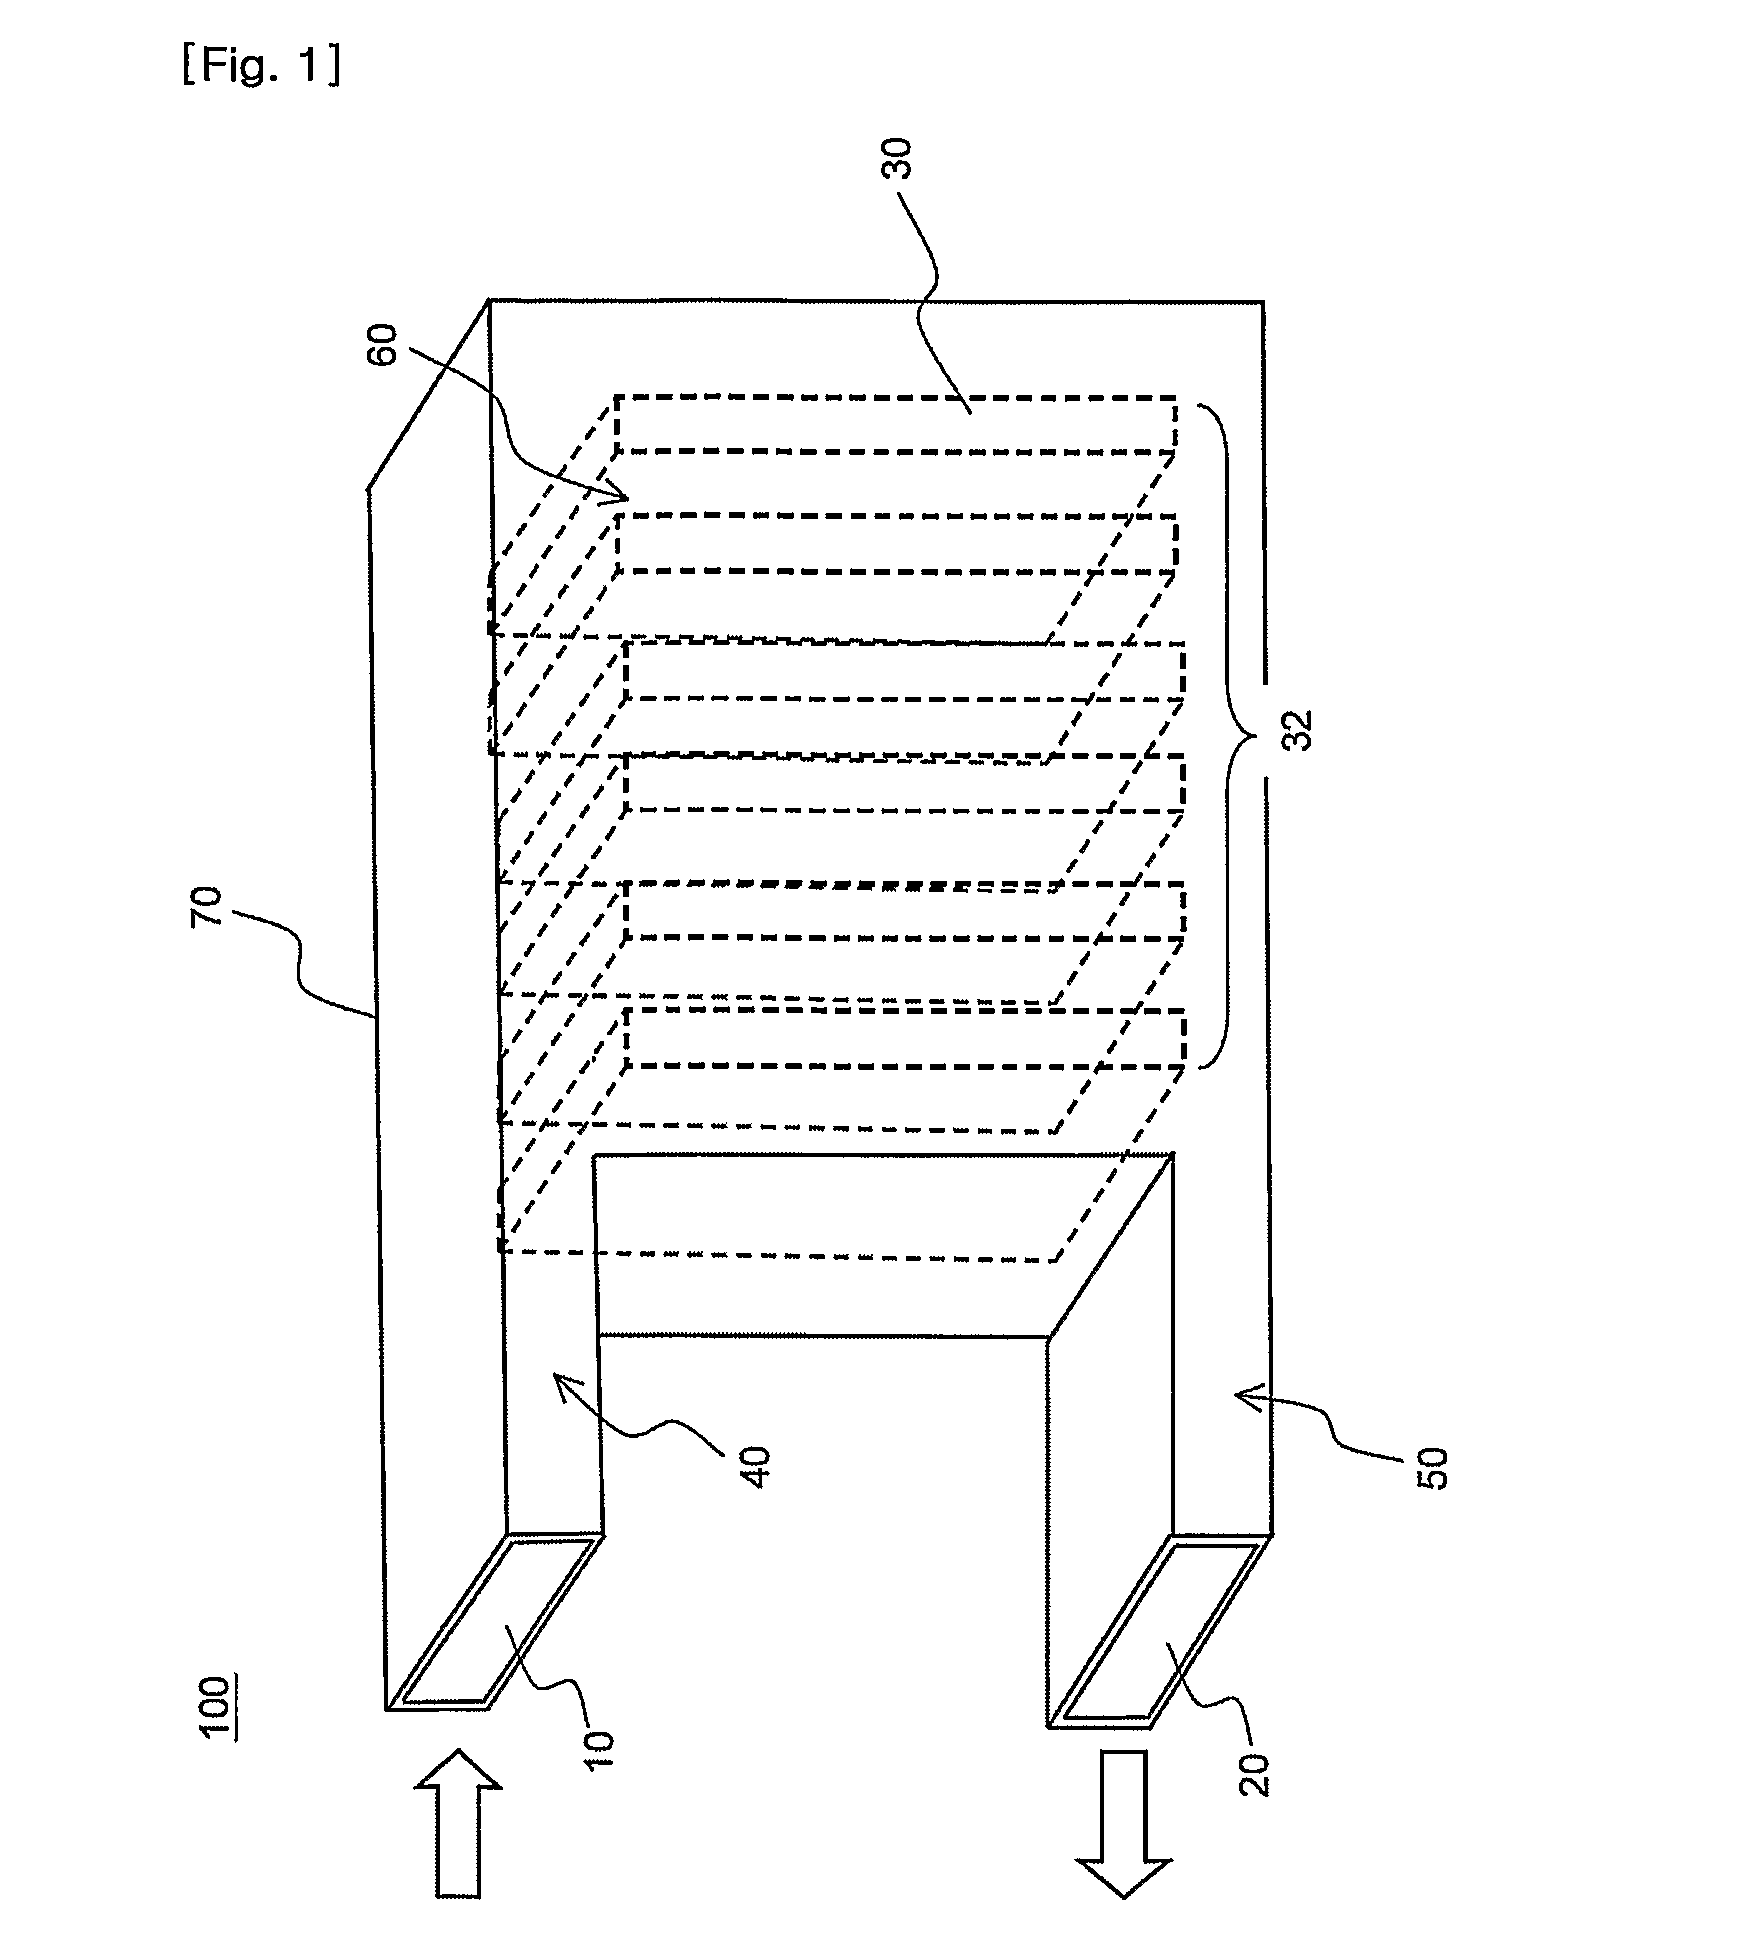 Middle or large-sized battery pack case providing improved distribution uniformity in coolant flux